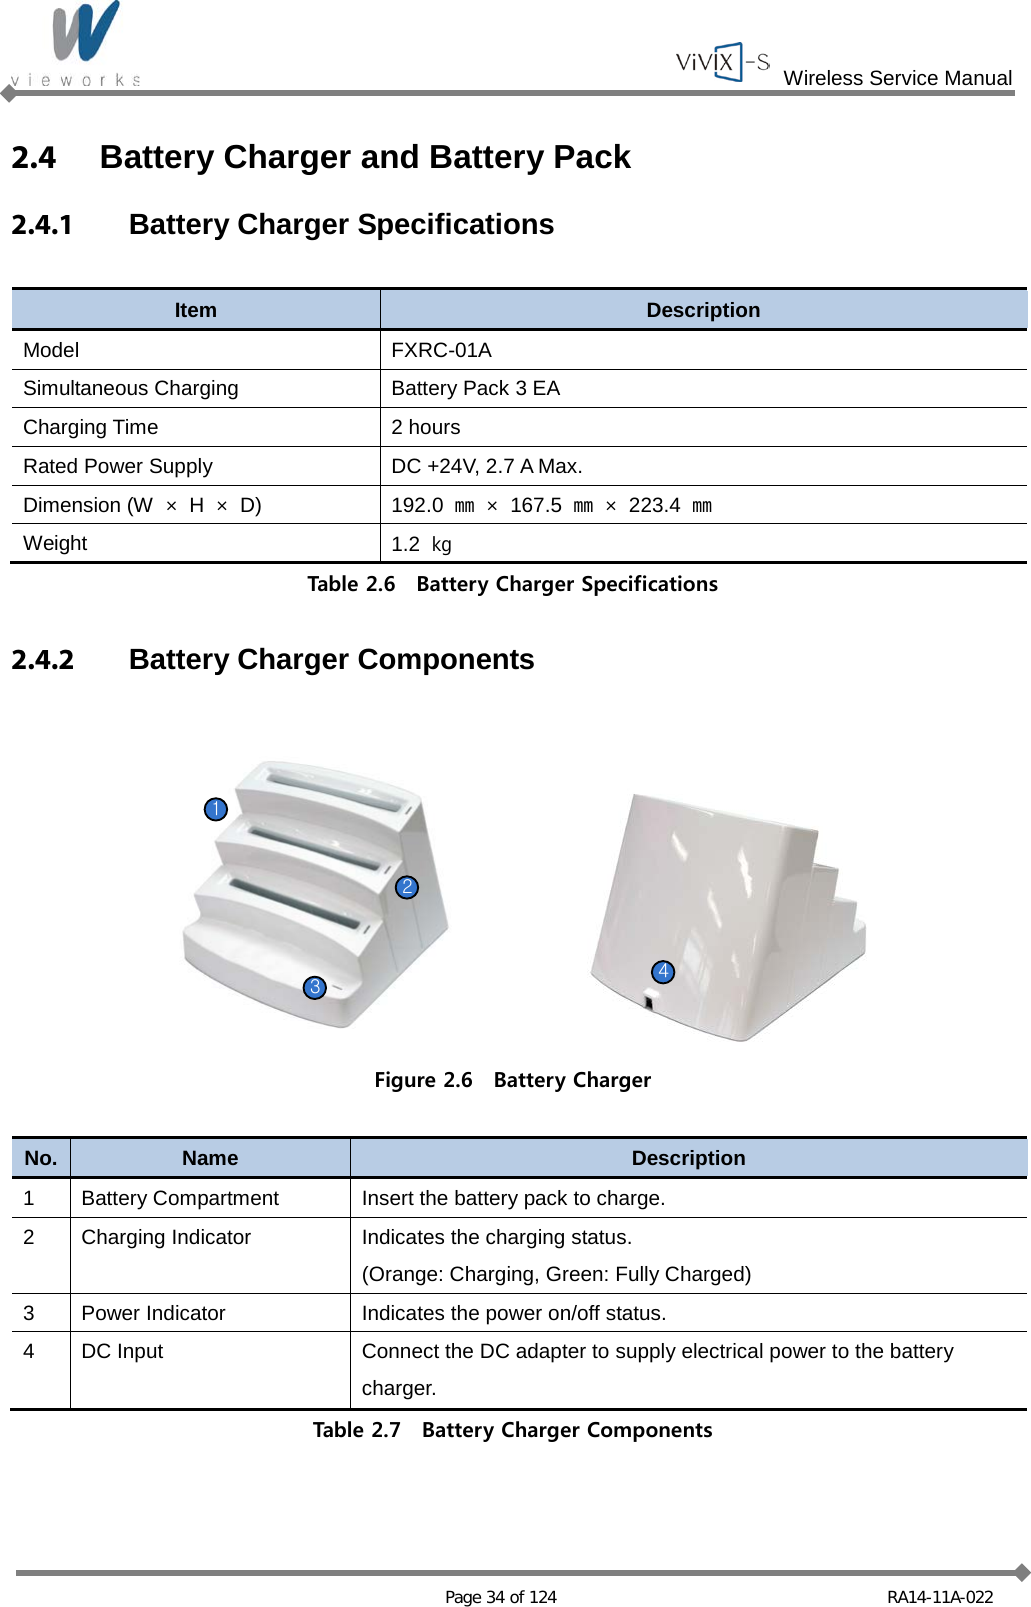  Wireless Service Manual   Page 34 of 124 RA14-11A-022 2.4 Battery Charger and Battery Pack 2.4.1 Battery Charger Specifications  Item Description Model FXRC-01A Simultaneous Charging Battery Pack 3 EA Charging Time 2 hours Rated Power Supply DC +24V, 2.7 A Max. Dimension (W  × H  × D) 192.0  ㎜ ×  167.5  ㎜ × 223.4  ㎜ Weight 1.2 ㎏ Table 2.6  Battery Charger Specifications  2.4.2 Battery Charger Components  1234 Figure 2.6  Battery Charger  No. Name Description 1  Battery Compartment Insert the battery pack to charge. 2  Charging Indicator Indicates the charging status. (Orange: Charging, Green: Fully Charged) 3  Power Indicator Indicates the power on/off status. 4  DC Input Connect the DC adapter to supply electrical power to the battery charger. Table 2.7  Battery Charger Components  